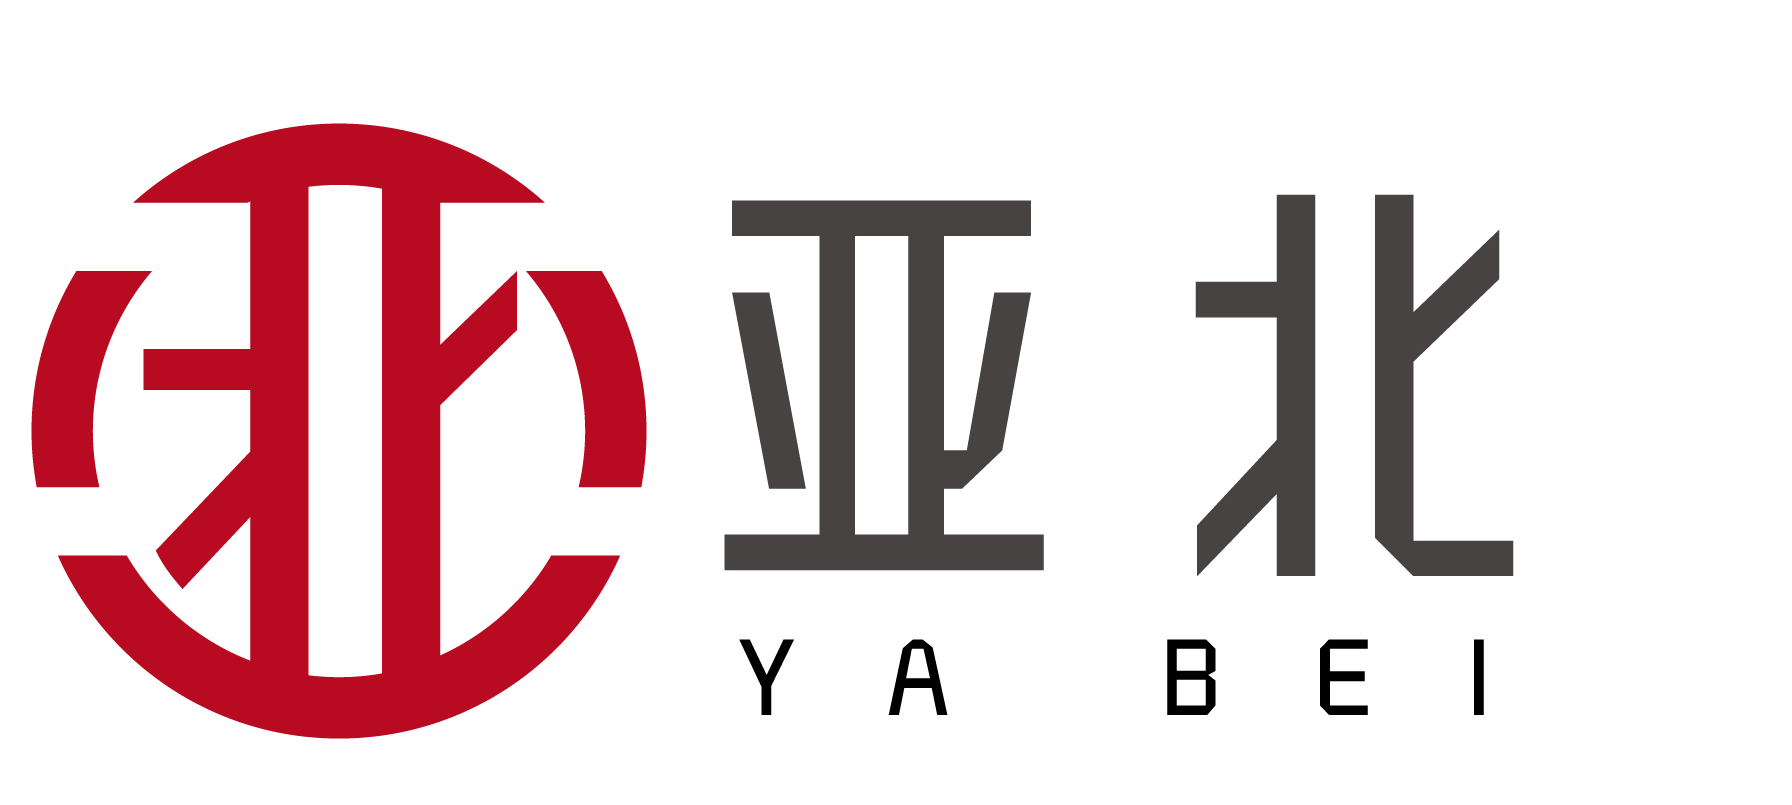 Yabeibuy.com | Asian Food & Snacks to your home